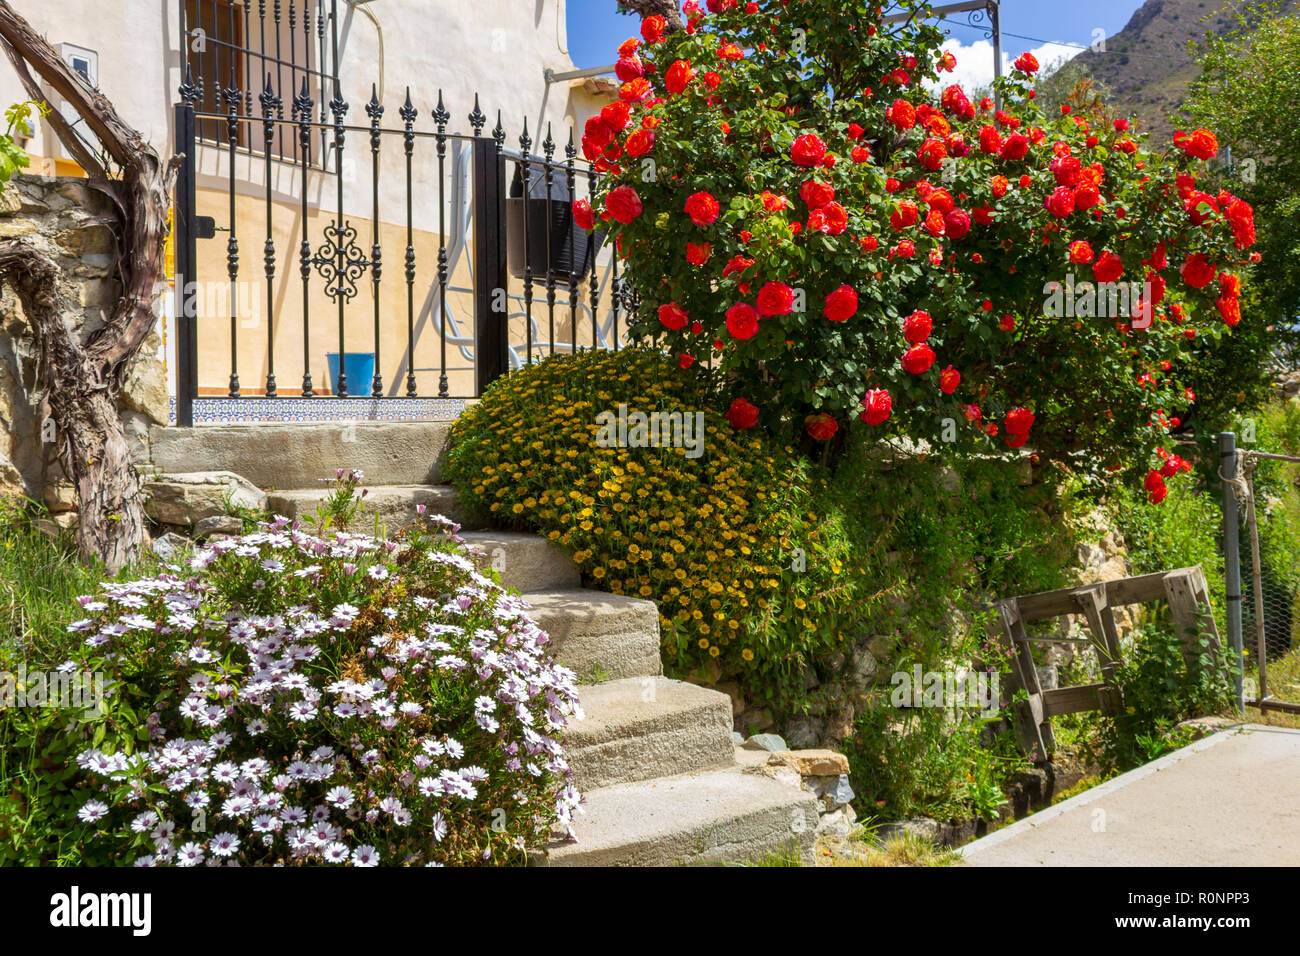 Spanish House with Steps up to a wrought iron gate and Rose bush, Daisy's and other flowers. Stock Photo